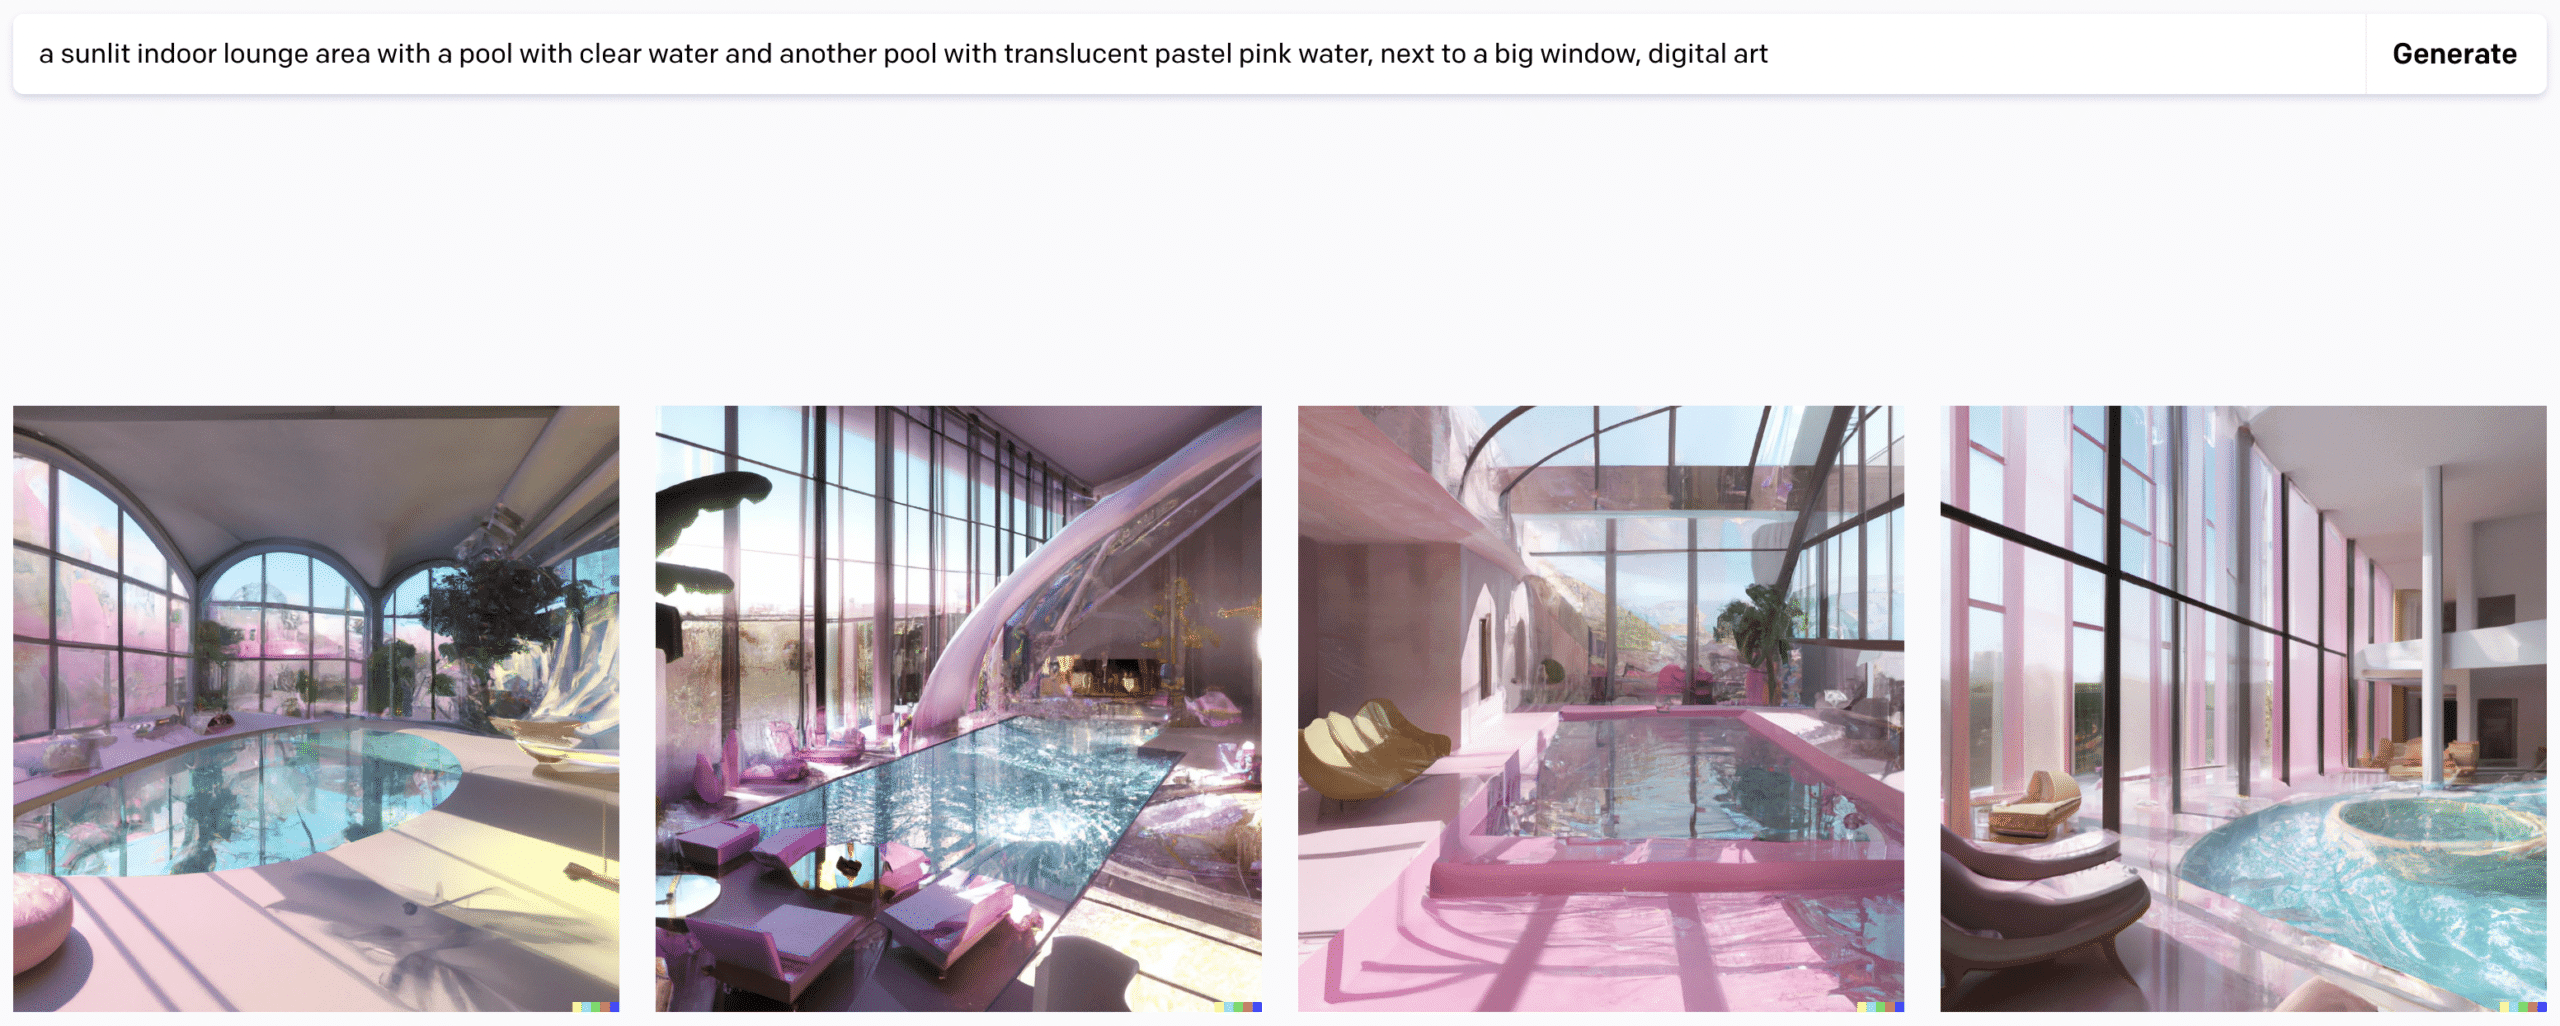 DALL-E 2.0 prompt - a sunlit indoor lounge area with a pool with clear water and another pool with translucent pastel pink water, next to a big window, digital art